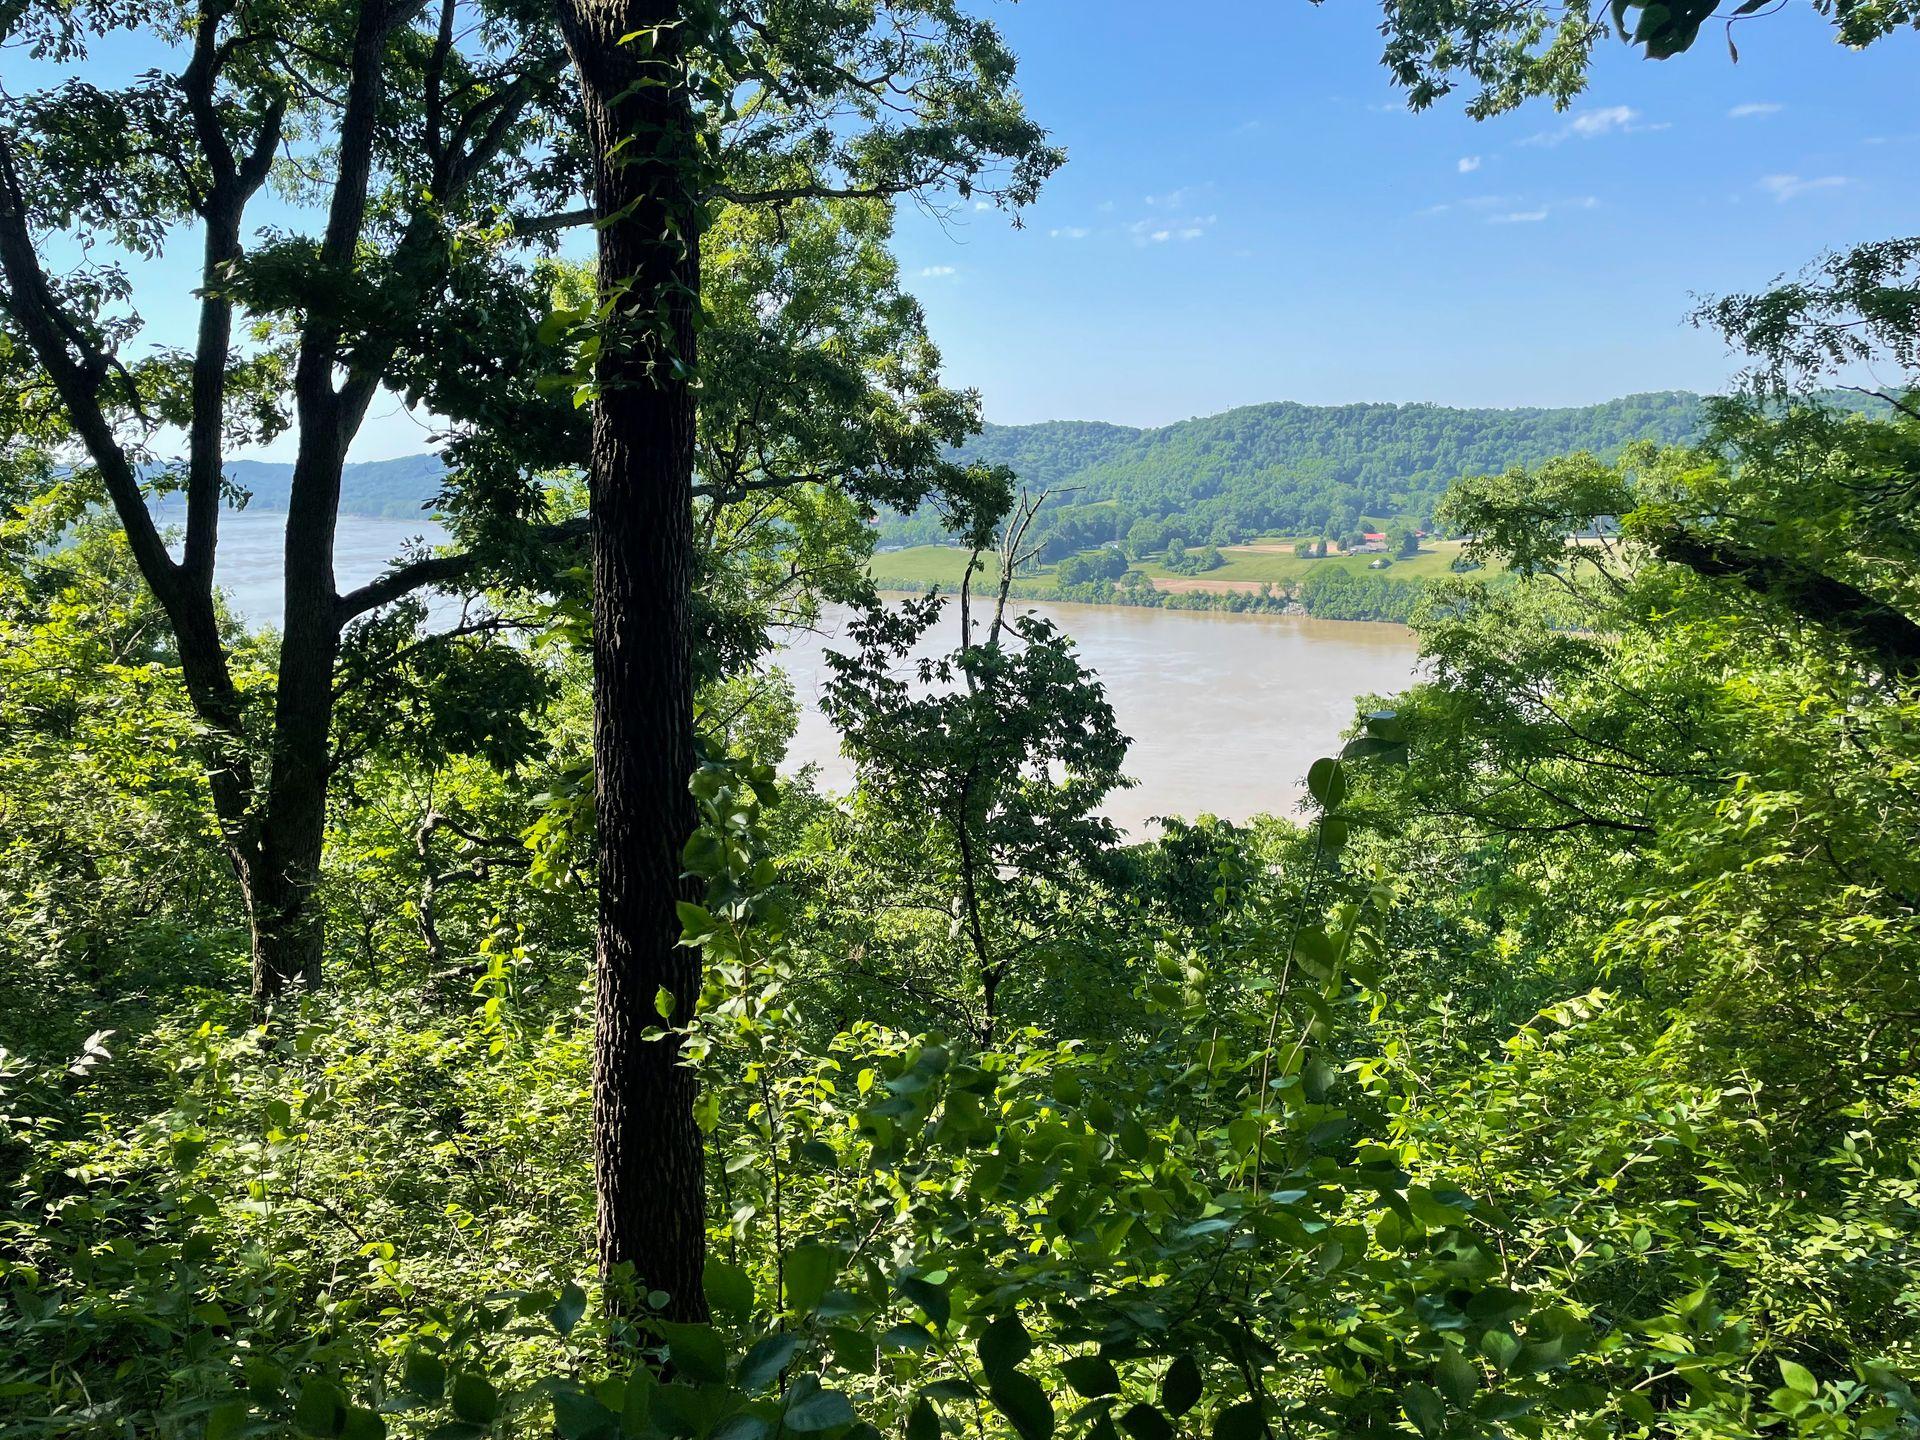 A view of the Ohio River through some trees from the top of Bender Mountain